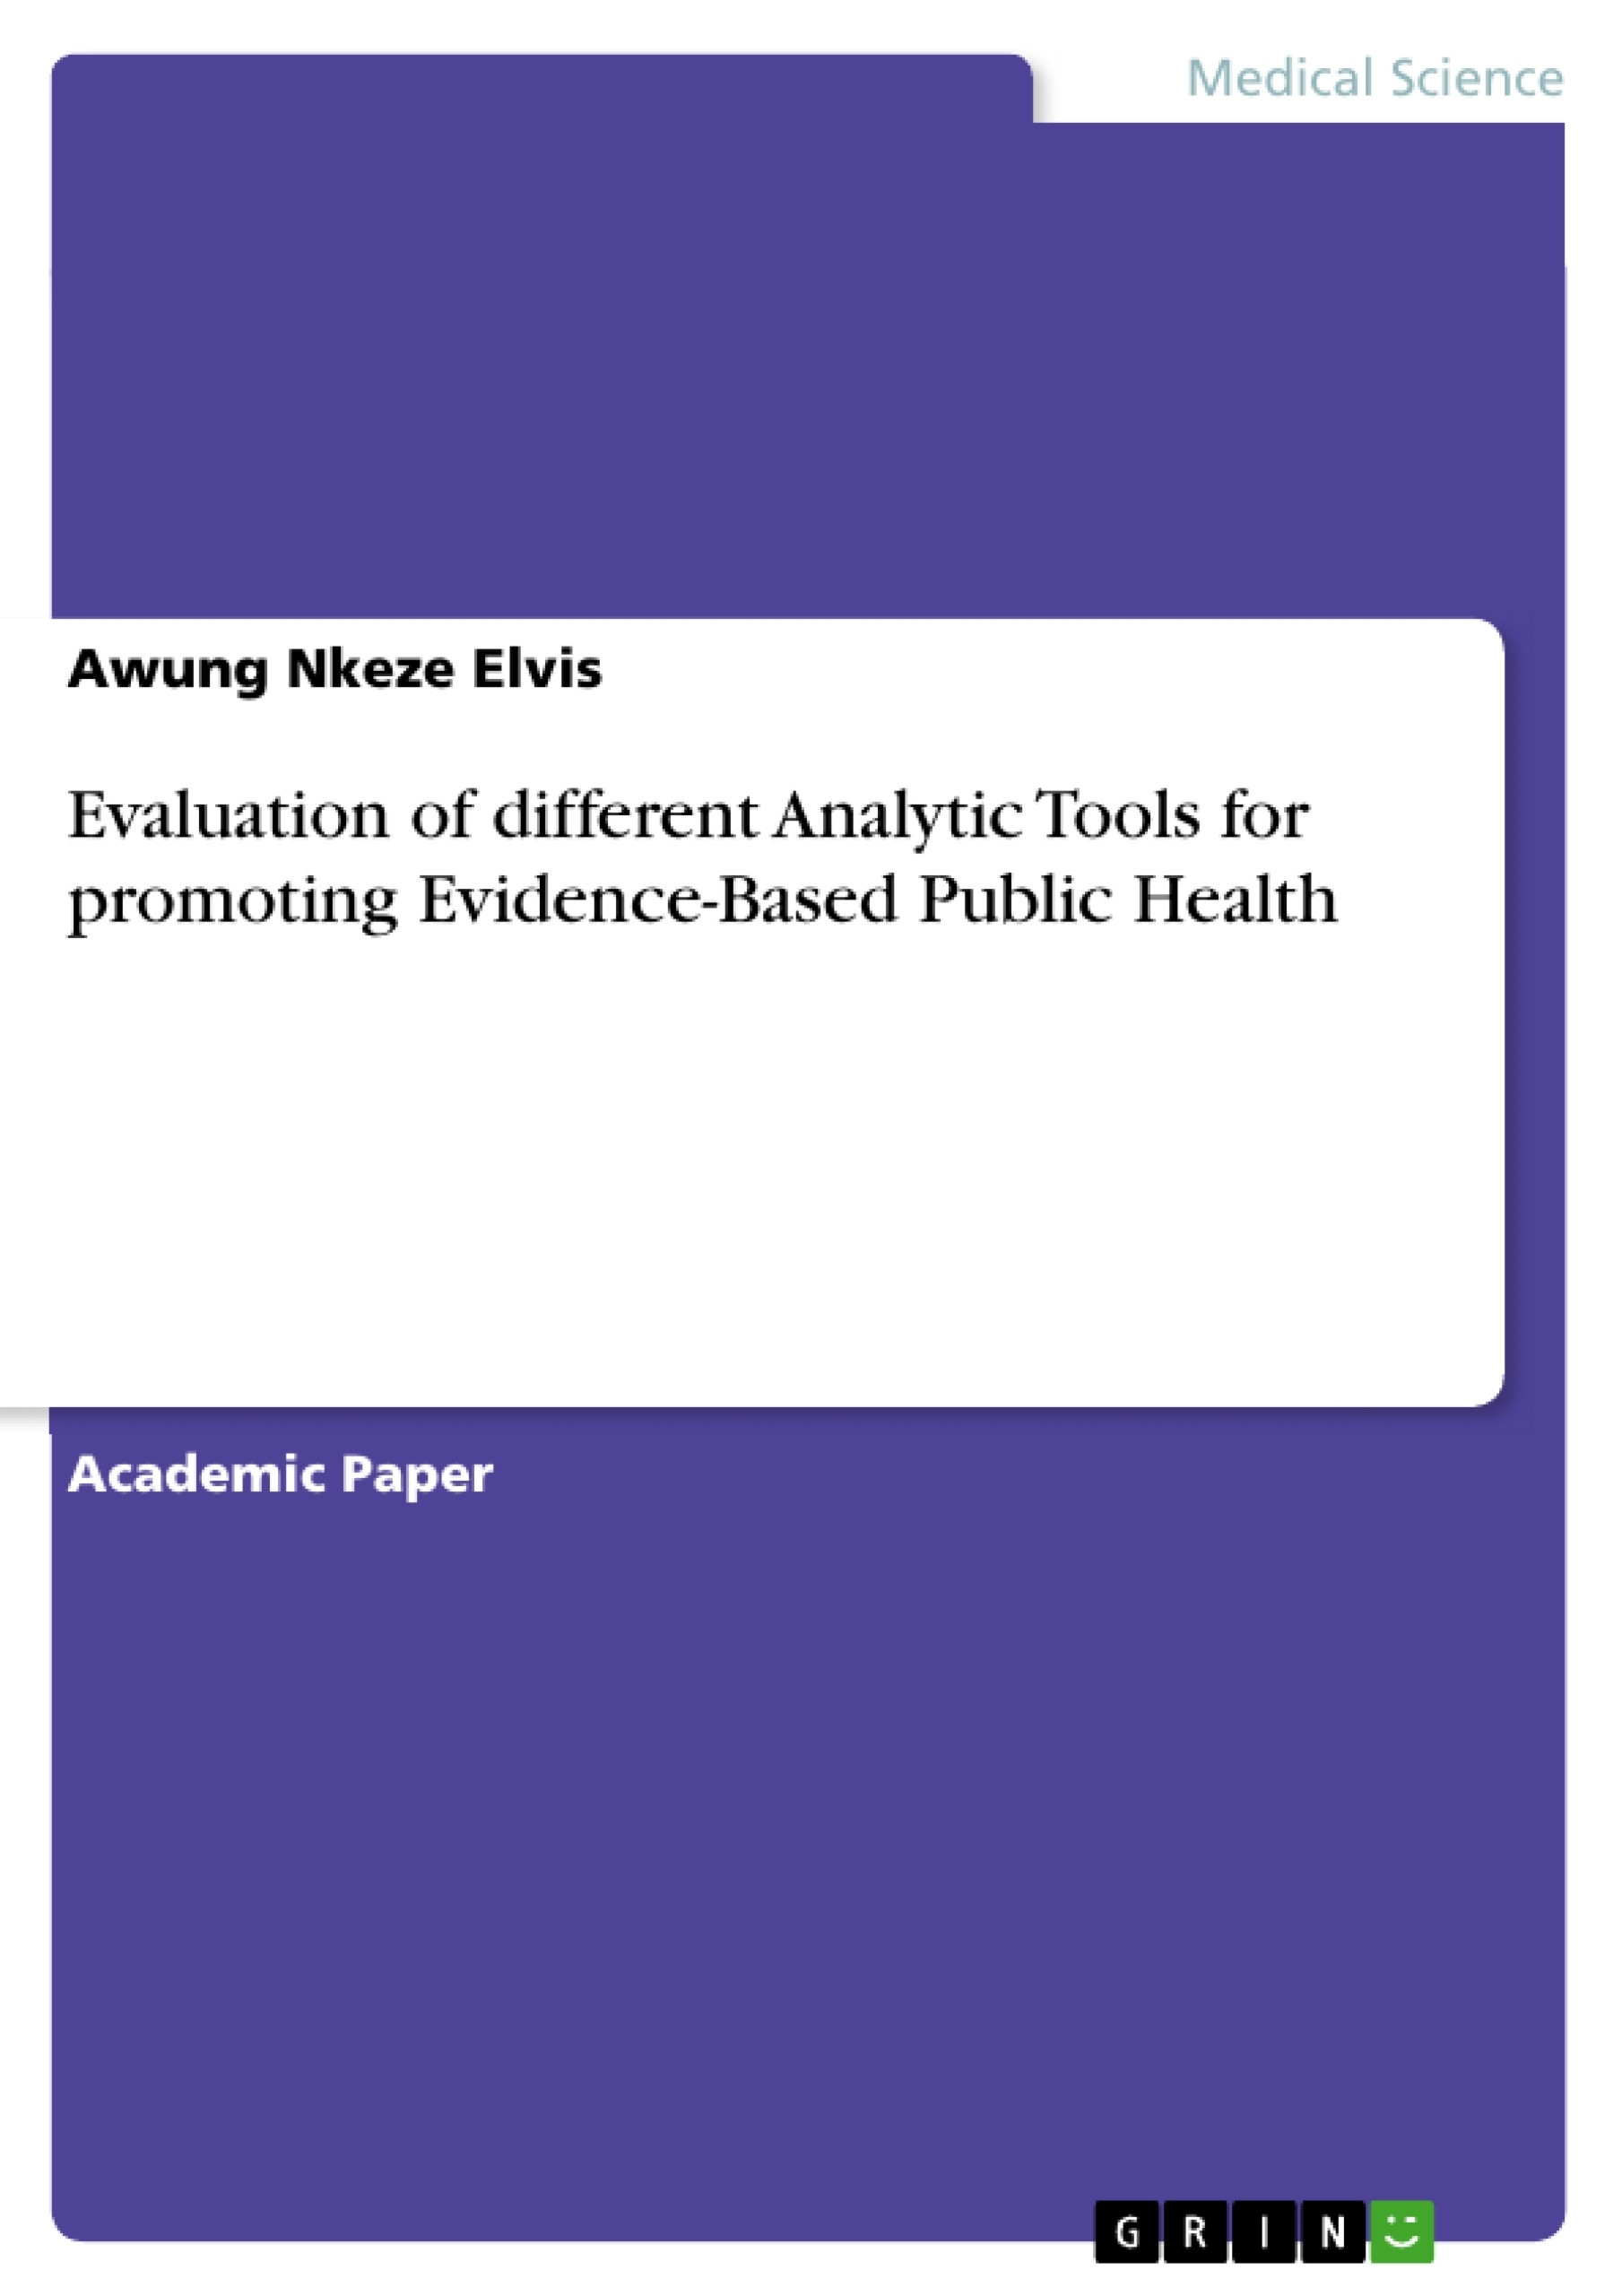 Title: Evaluation of different Analytic Tools for promoting Evidence-Based Public Health